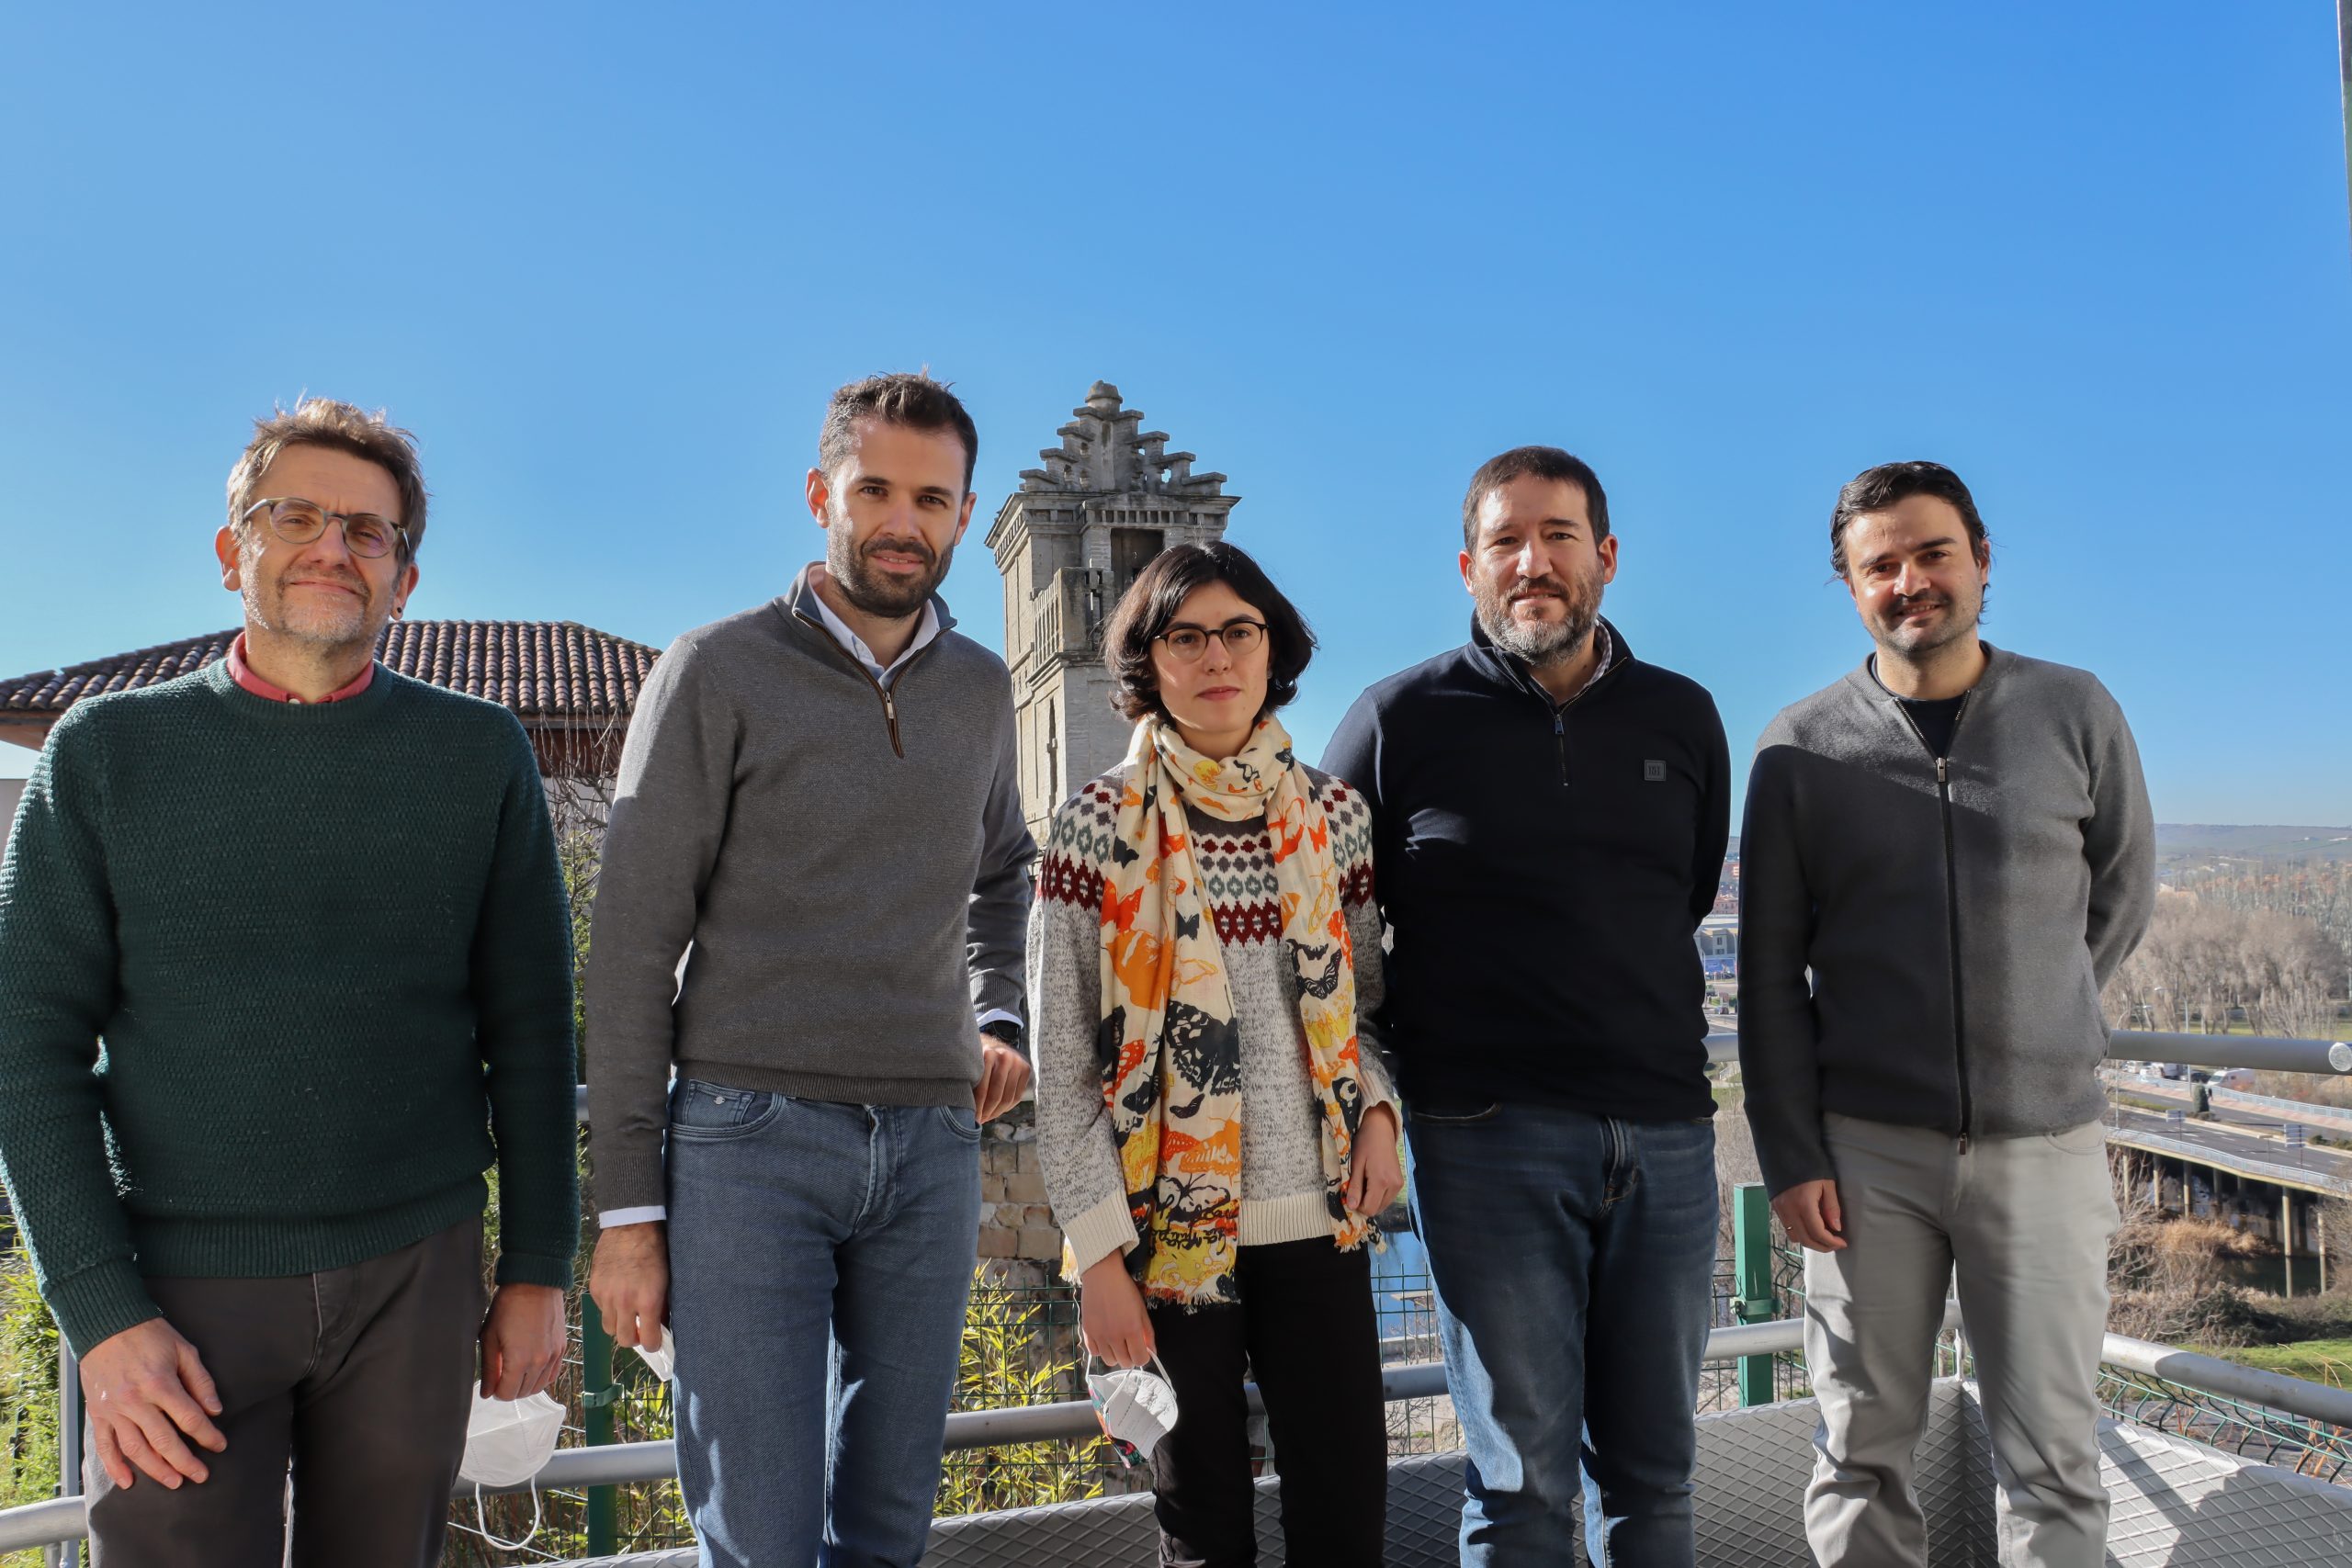 The University of Salamanca leads a pioneering international research project on ultraviolet structured light